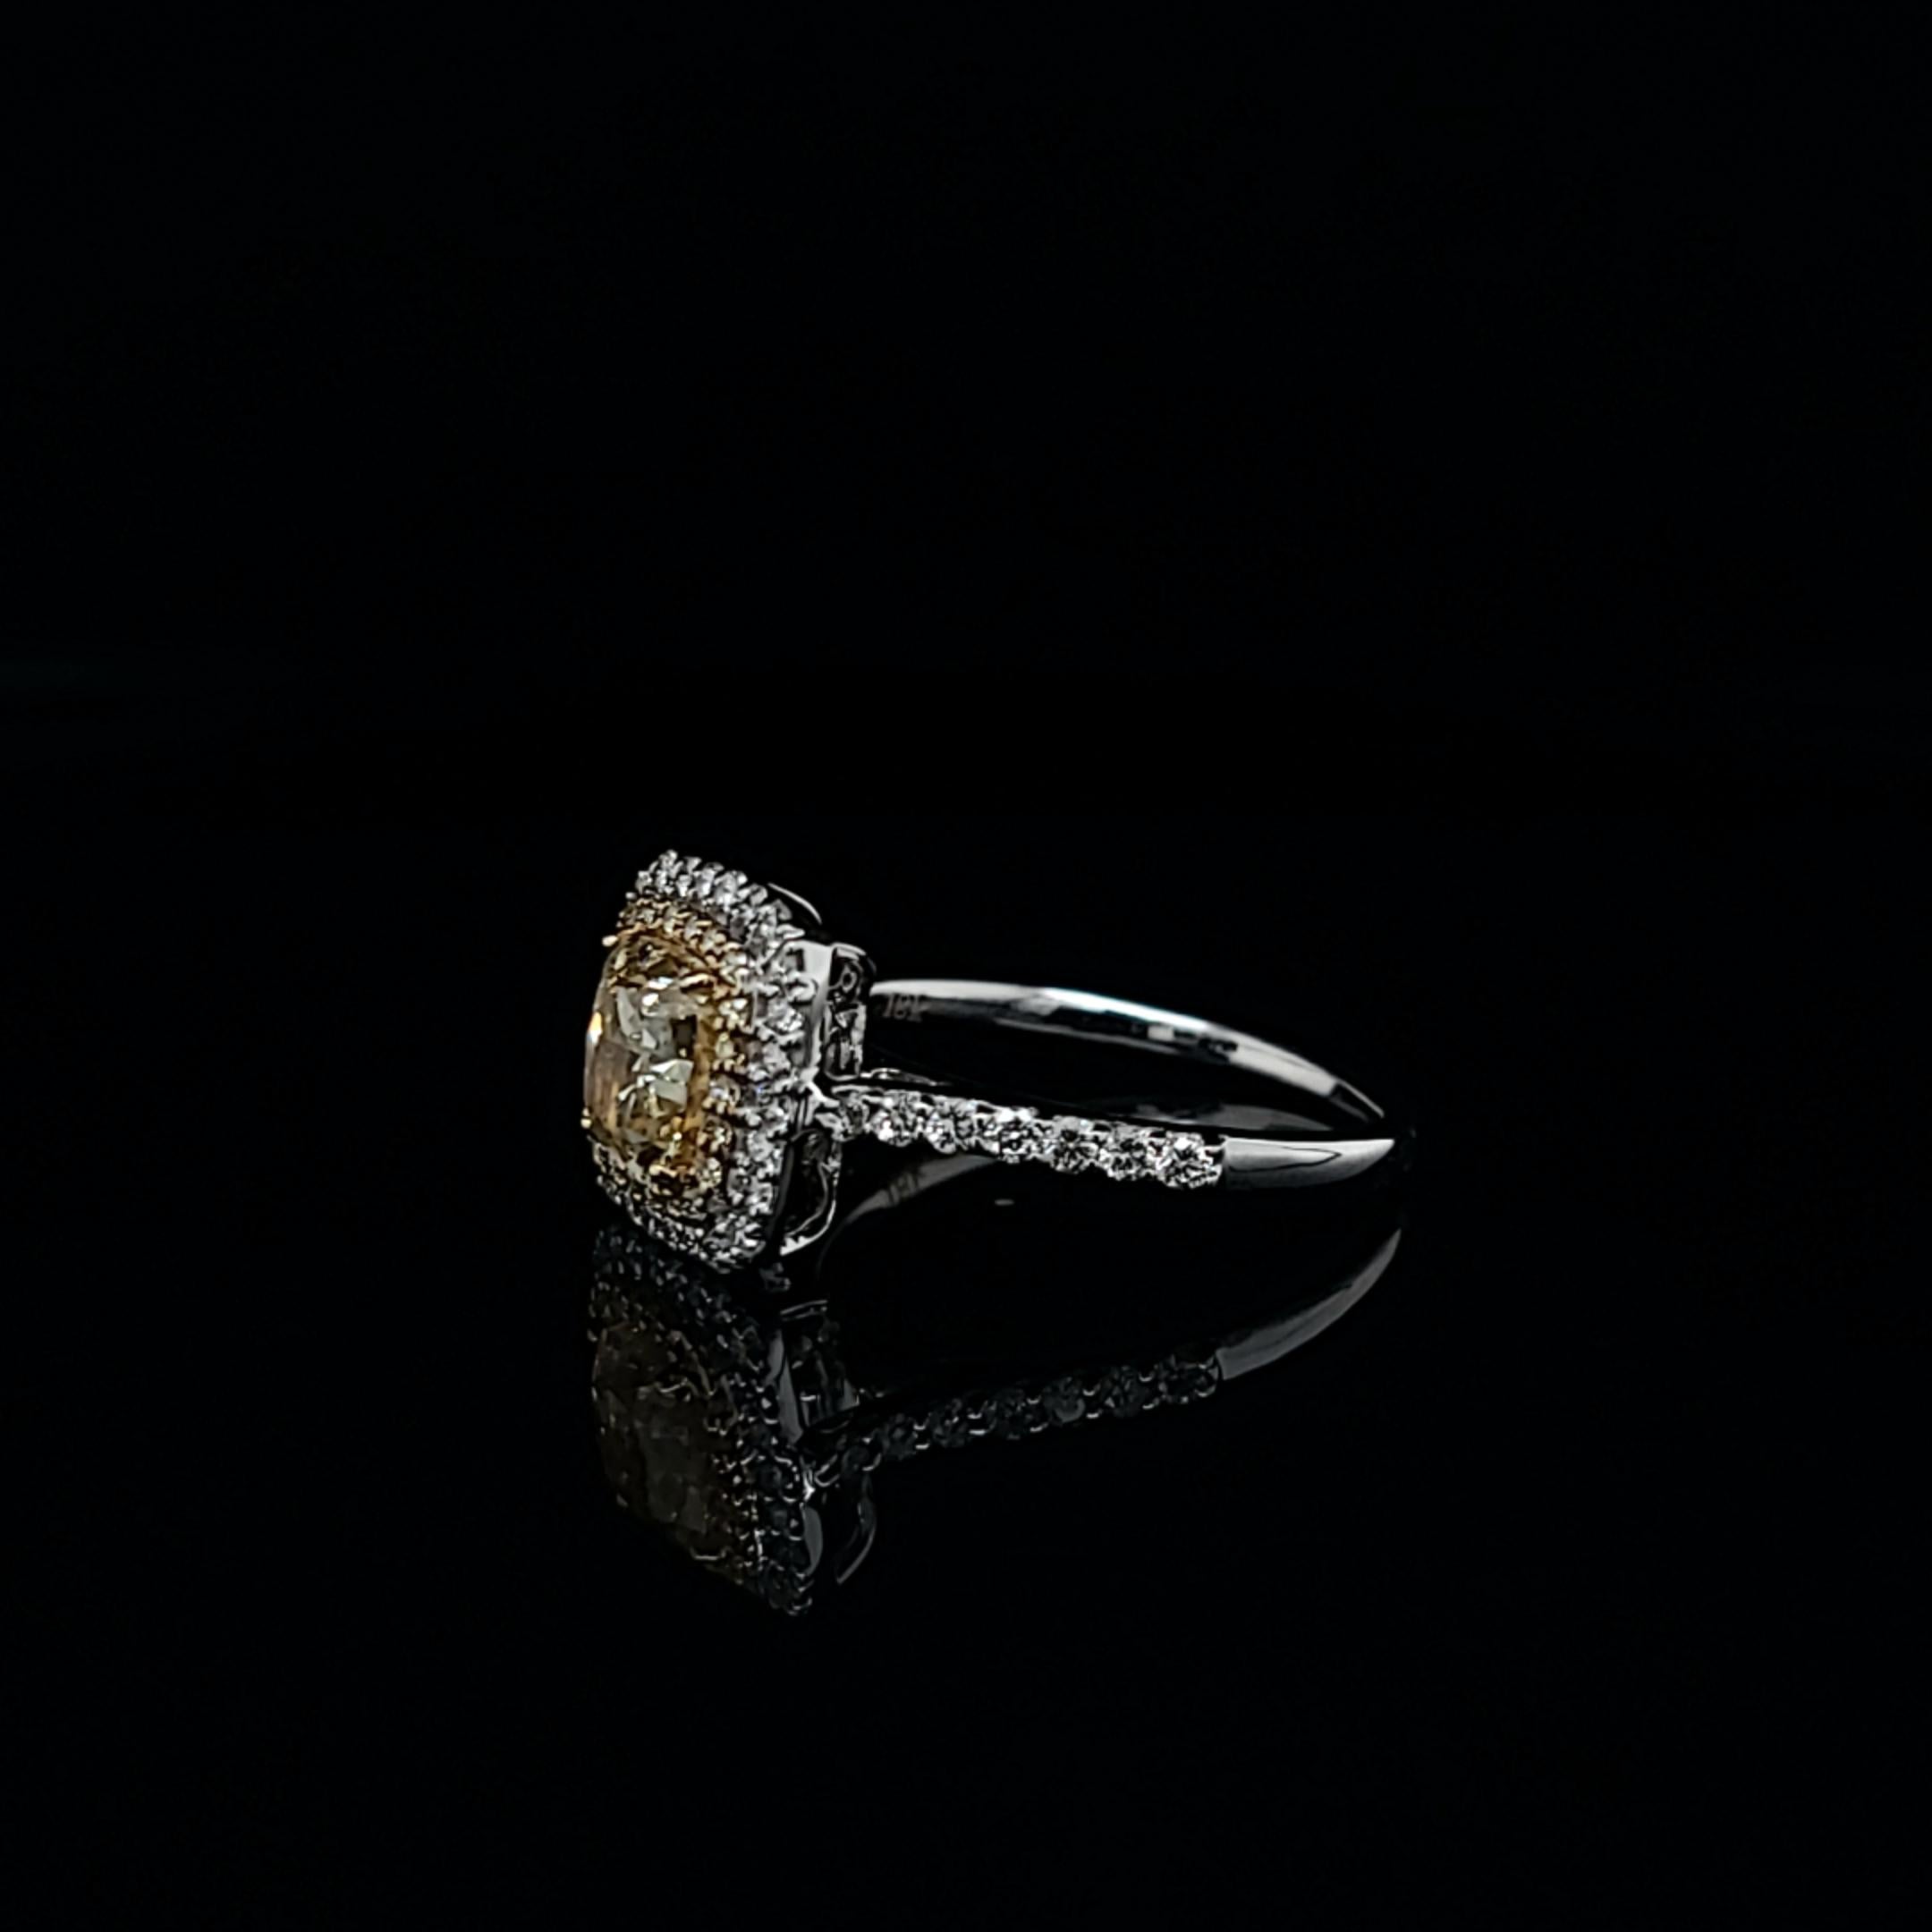 Ring featuring a 1.50 carat natural fancy light yellow cushion (SI1), GIA#: 7248913741. Accented by 22/.10ctw yellow melee and 38/.43ctw white melee. Set in 18k gold, size 6.5. 